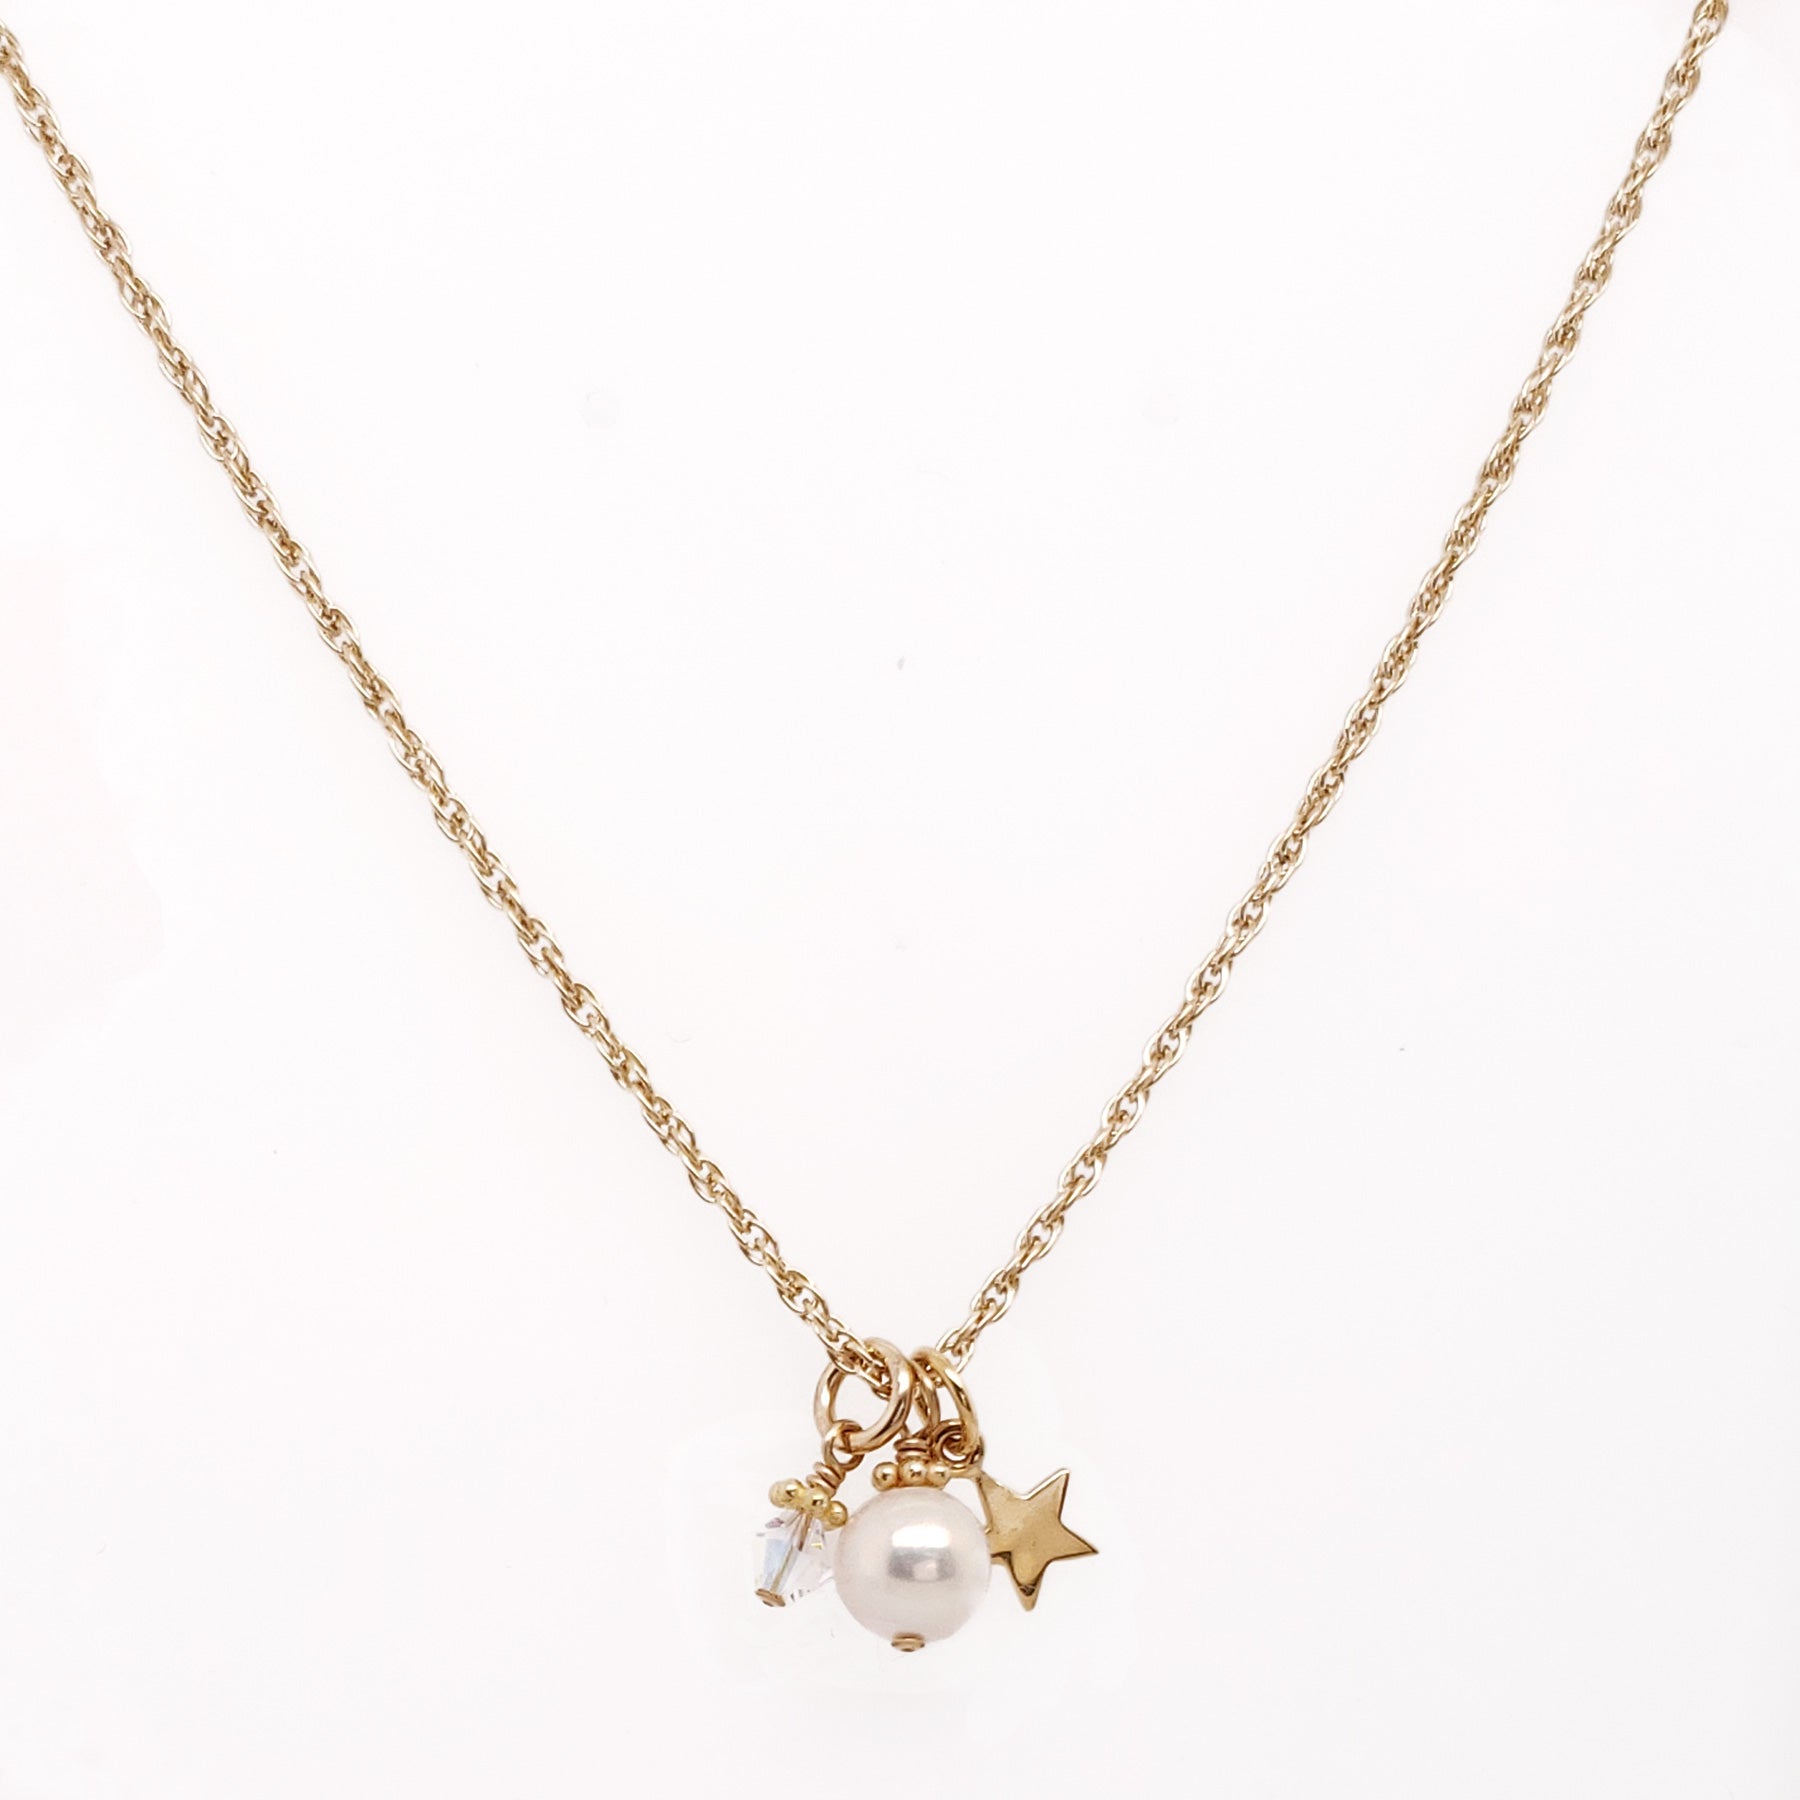 Wish on a Star Necklace in Gold-Filled - Little Girl's Pearls